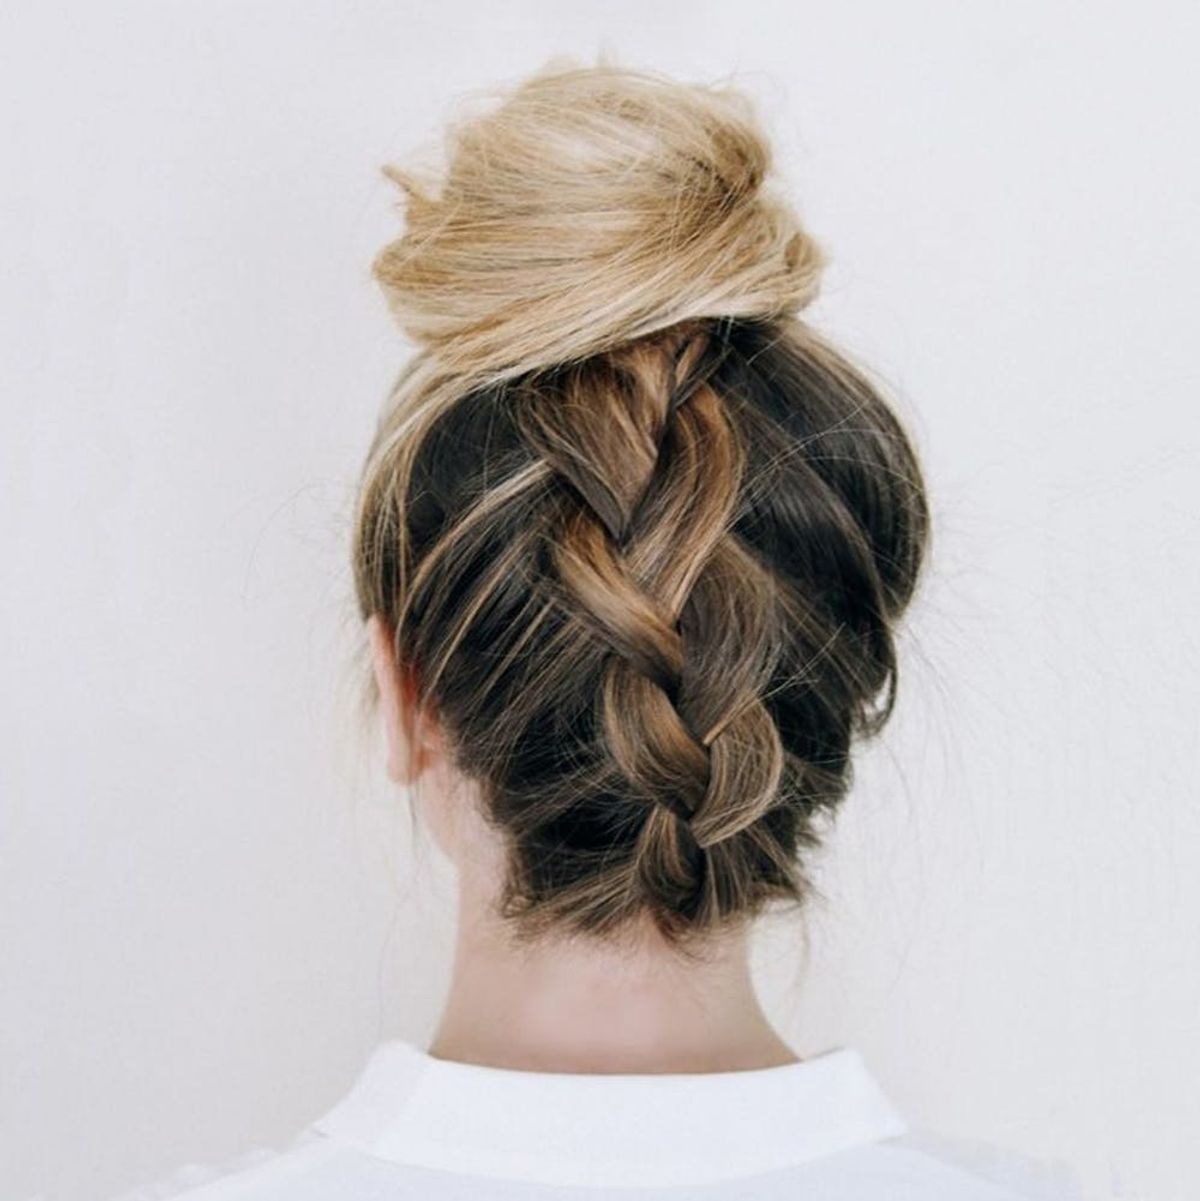 8 5-Minute Hairstyles for Every Kind of Valentine’s Day Date